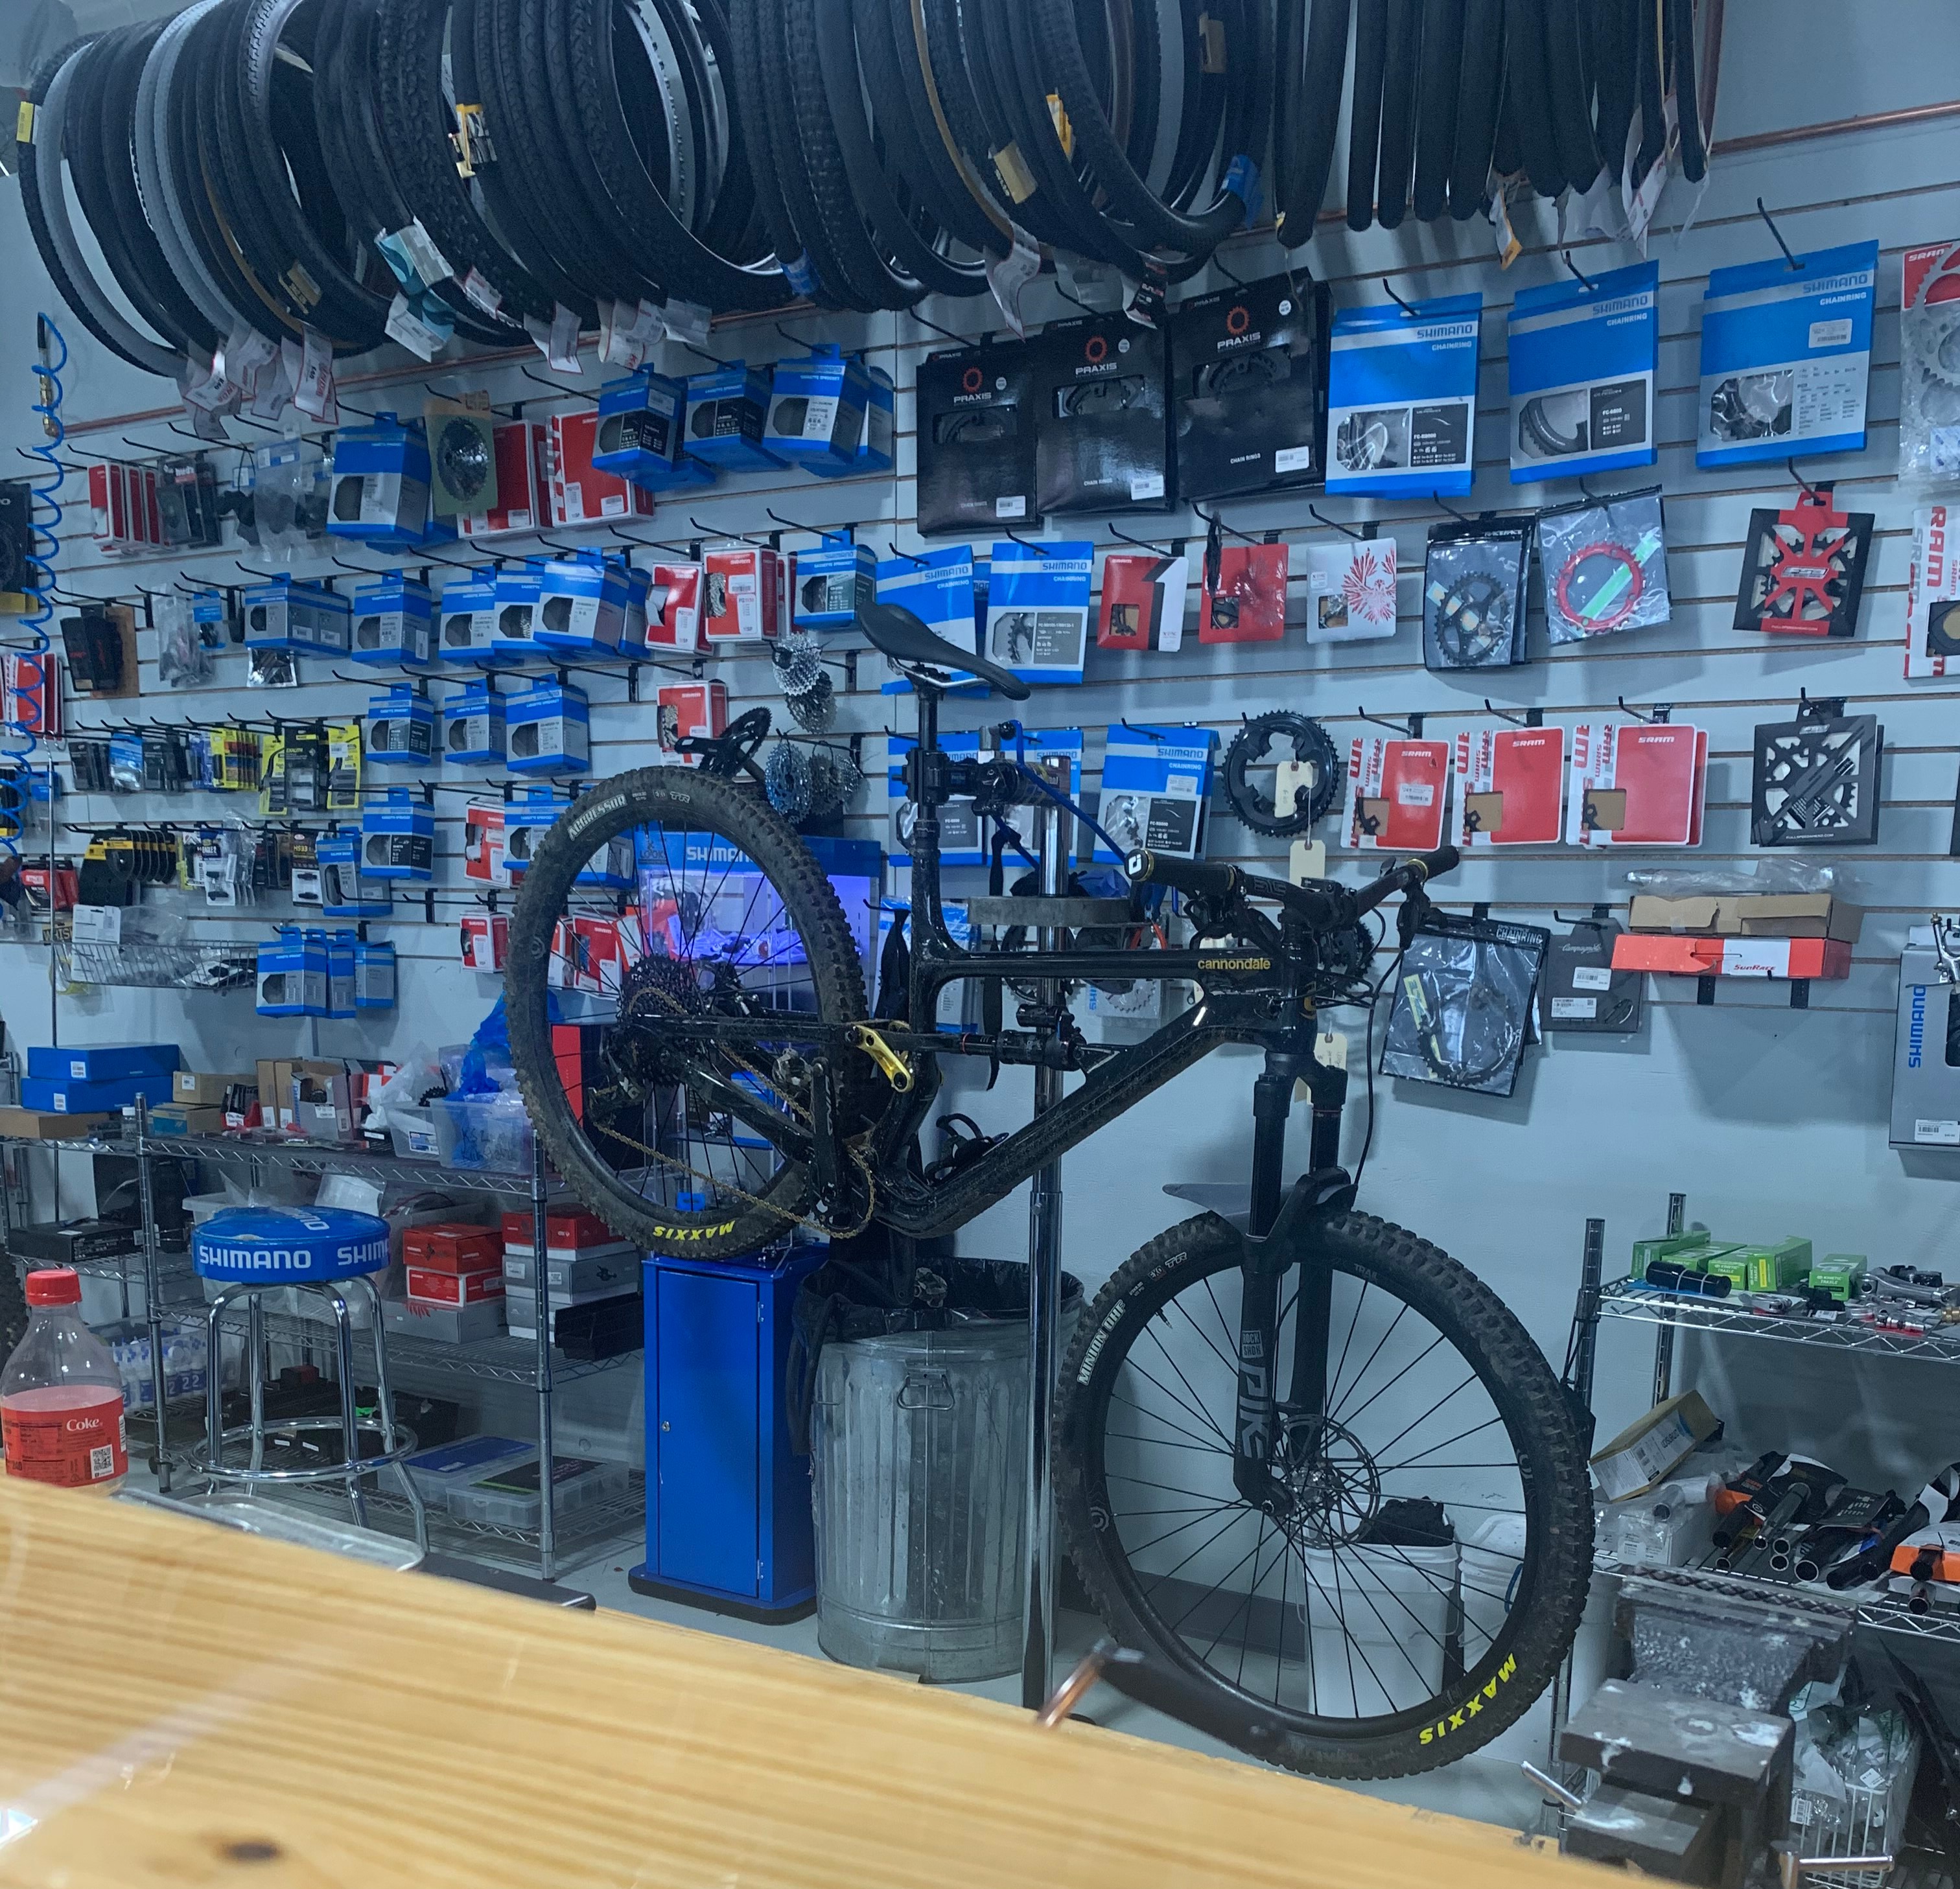 Our service department handles everything from flat tires to custom bicycle builds!